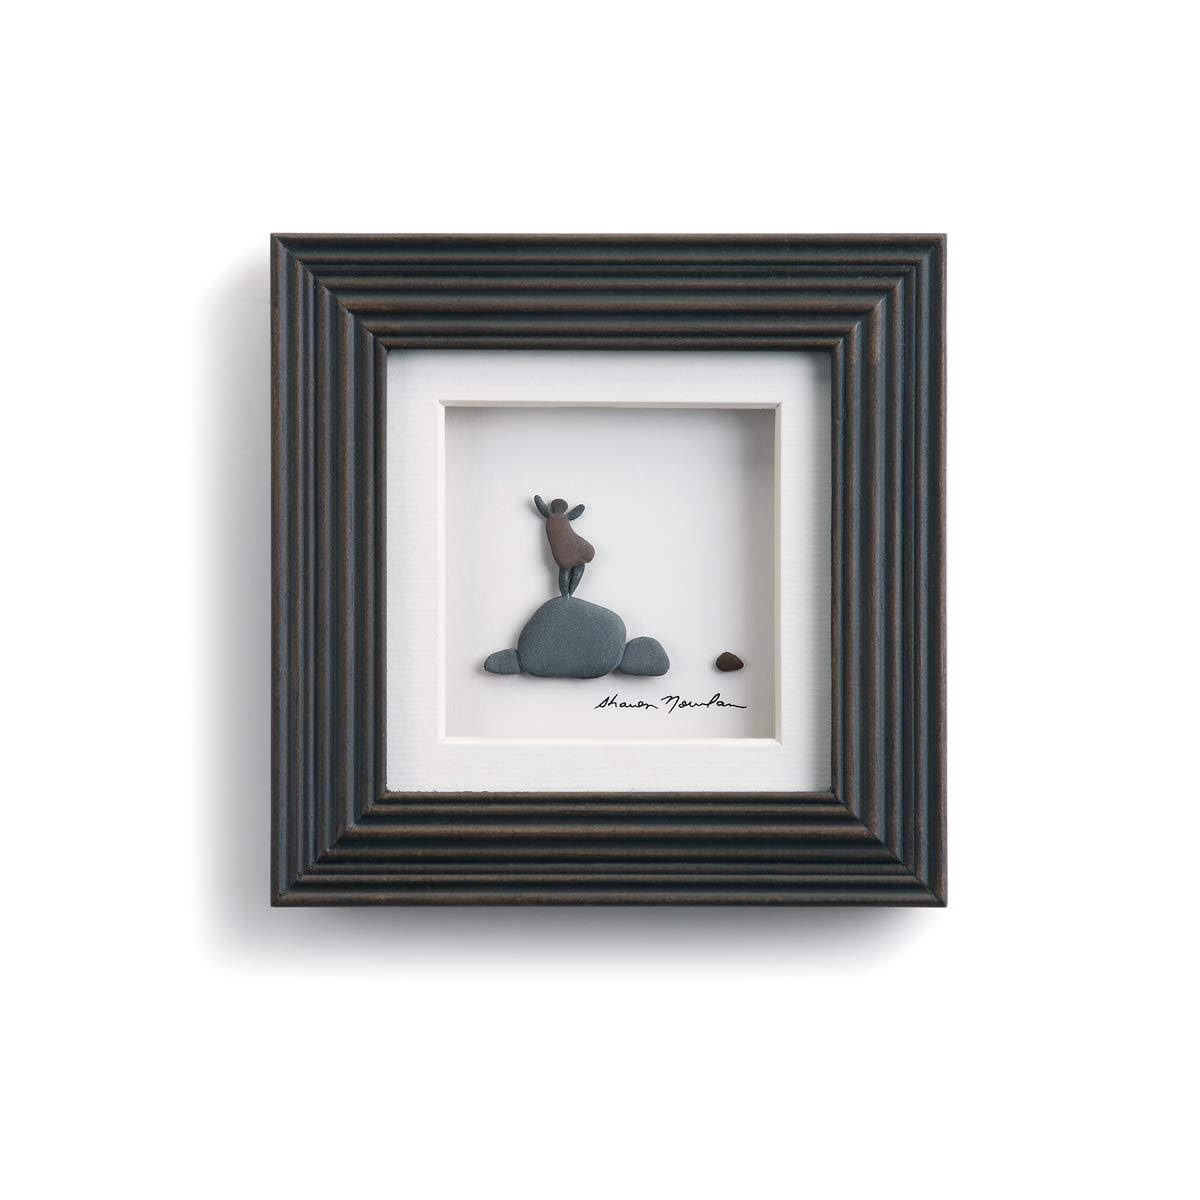 Sharon Nowlan White & Gray The Little Things Framed Wall Art One-Size